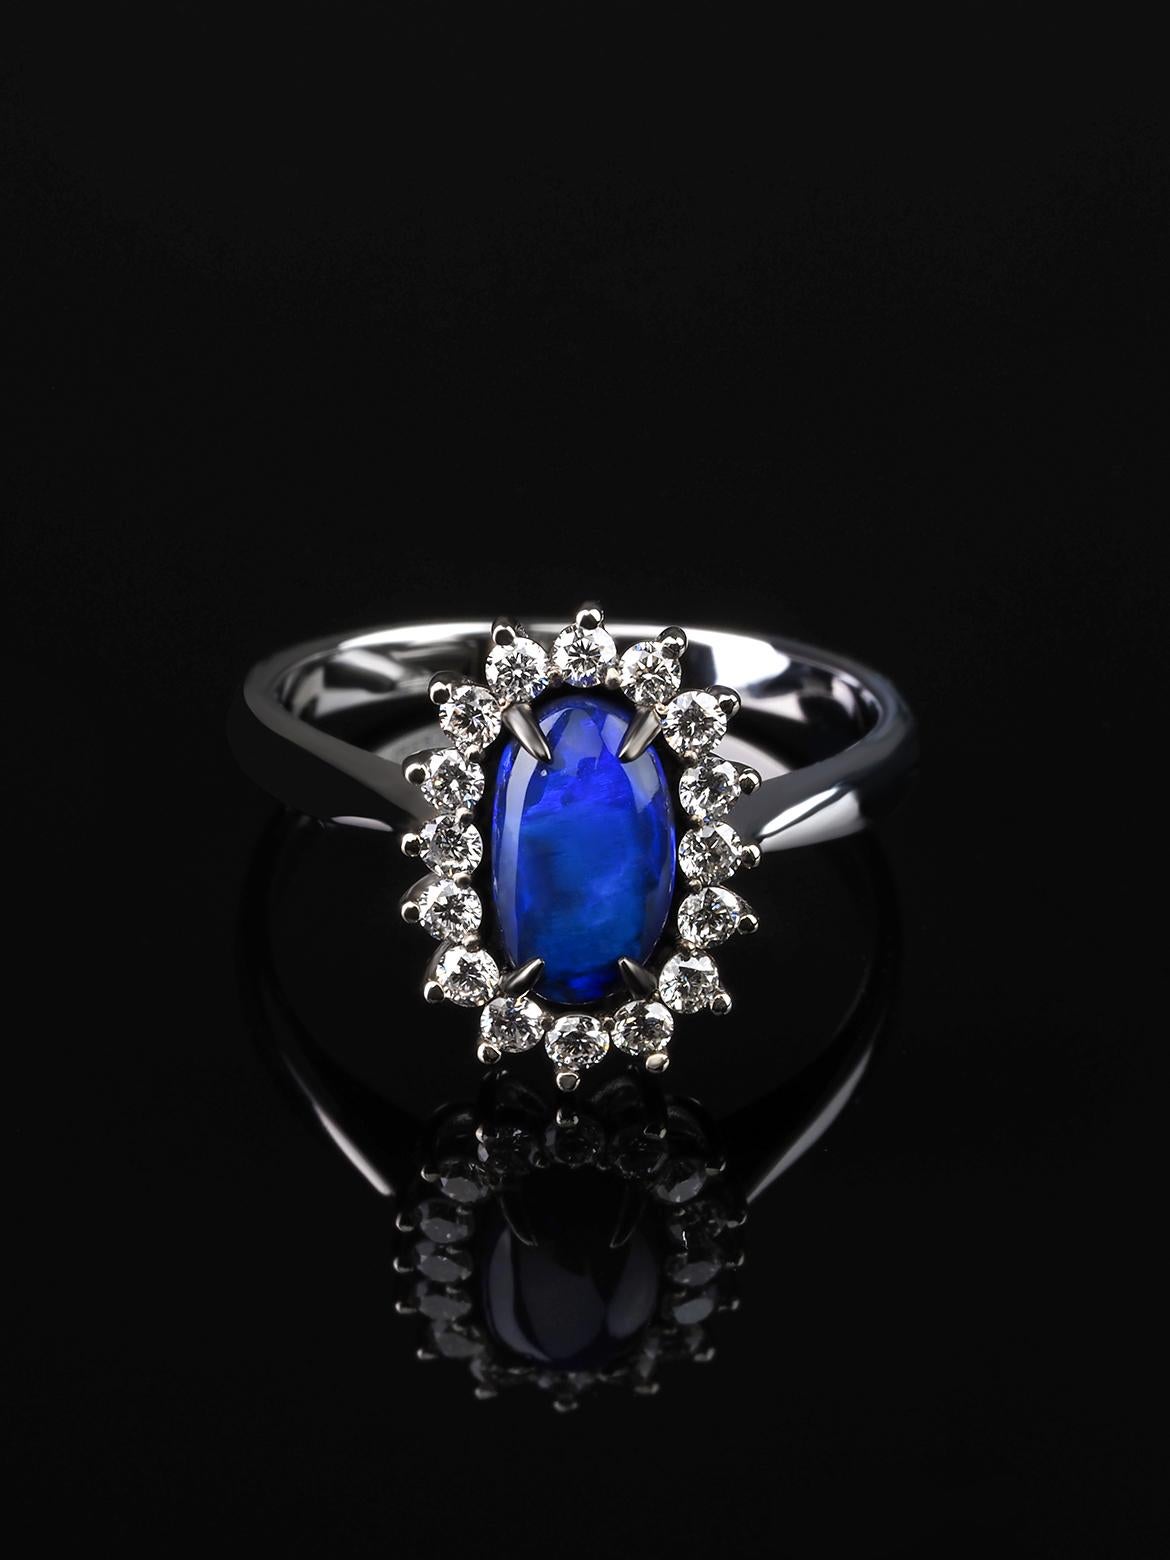 14K gold ring with Black Opal and Diamond 
opal origin - Australia 
opal measurements - 0.079 х 0.2 х 0.39 in / 2 х 5 х 10 mm
opal weight - 0.87 carats
ring size - 6.5 US
ring weight - 3.06 grams

Cupid Collection


We ship our jewelry worldwide –